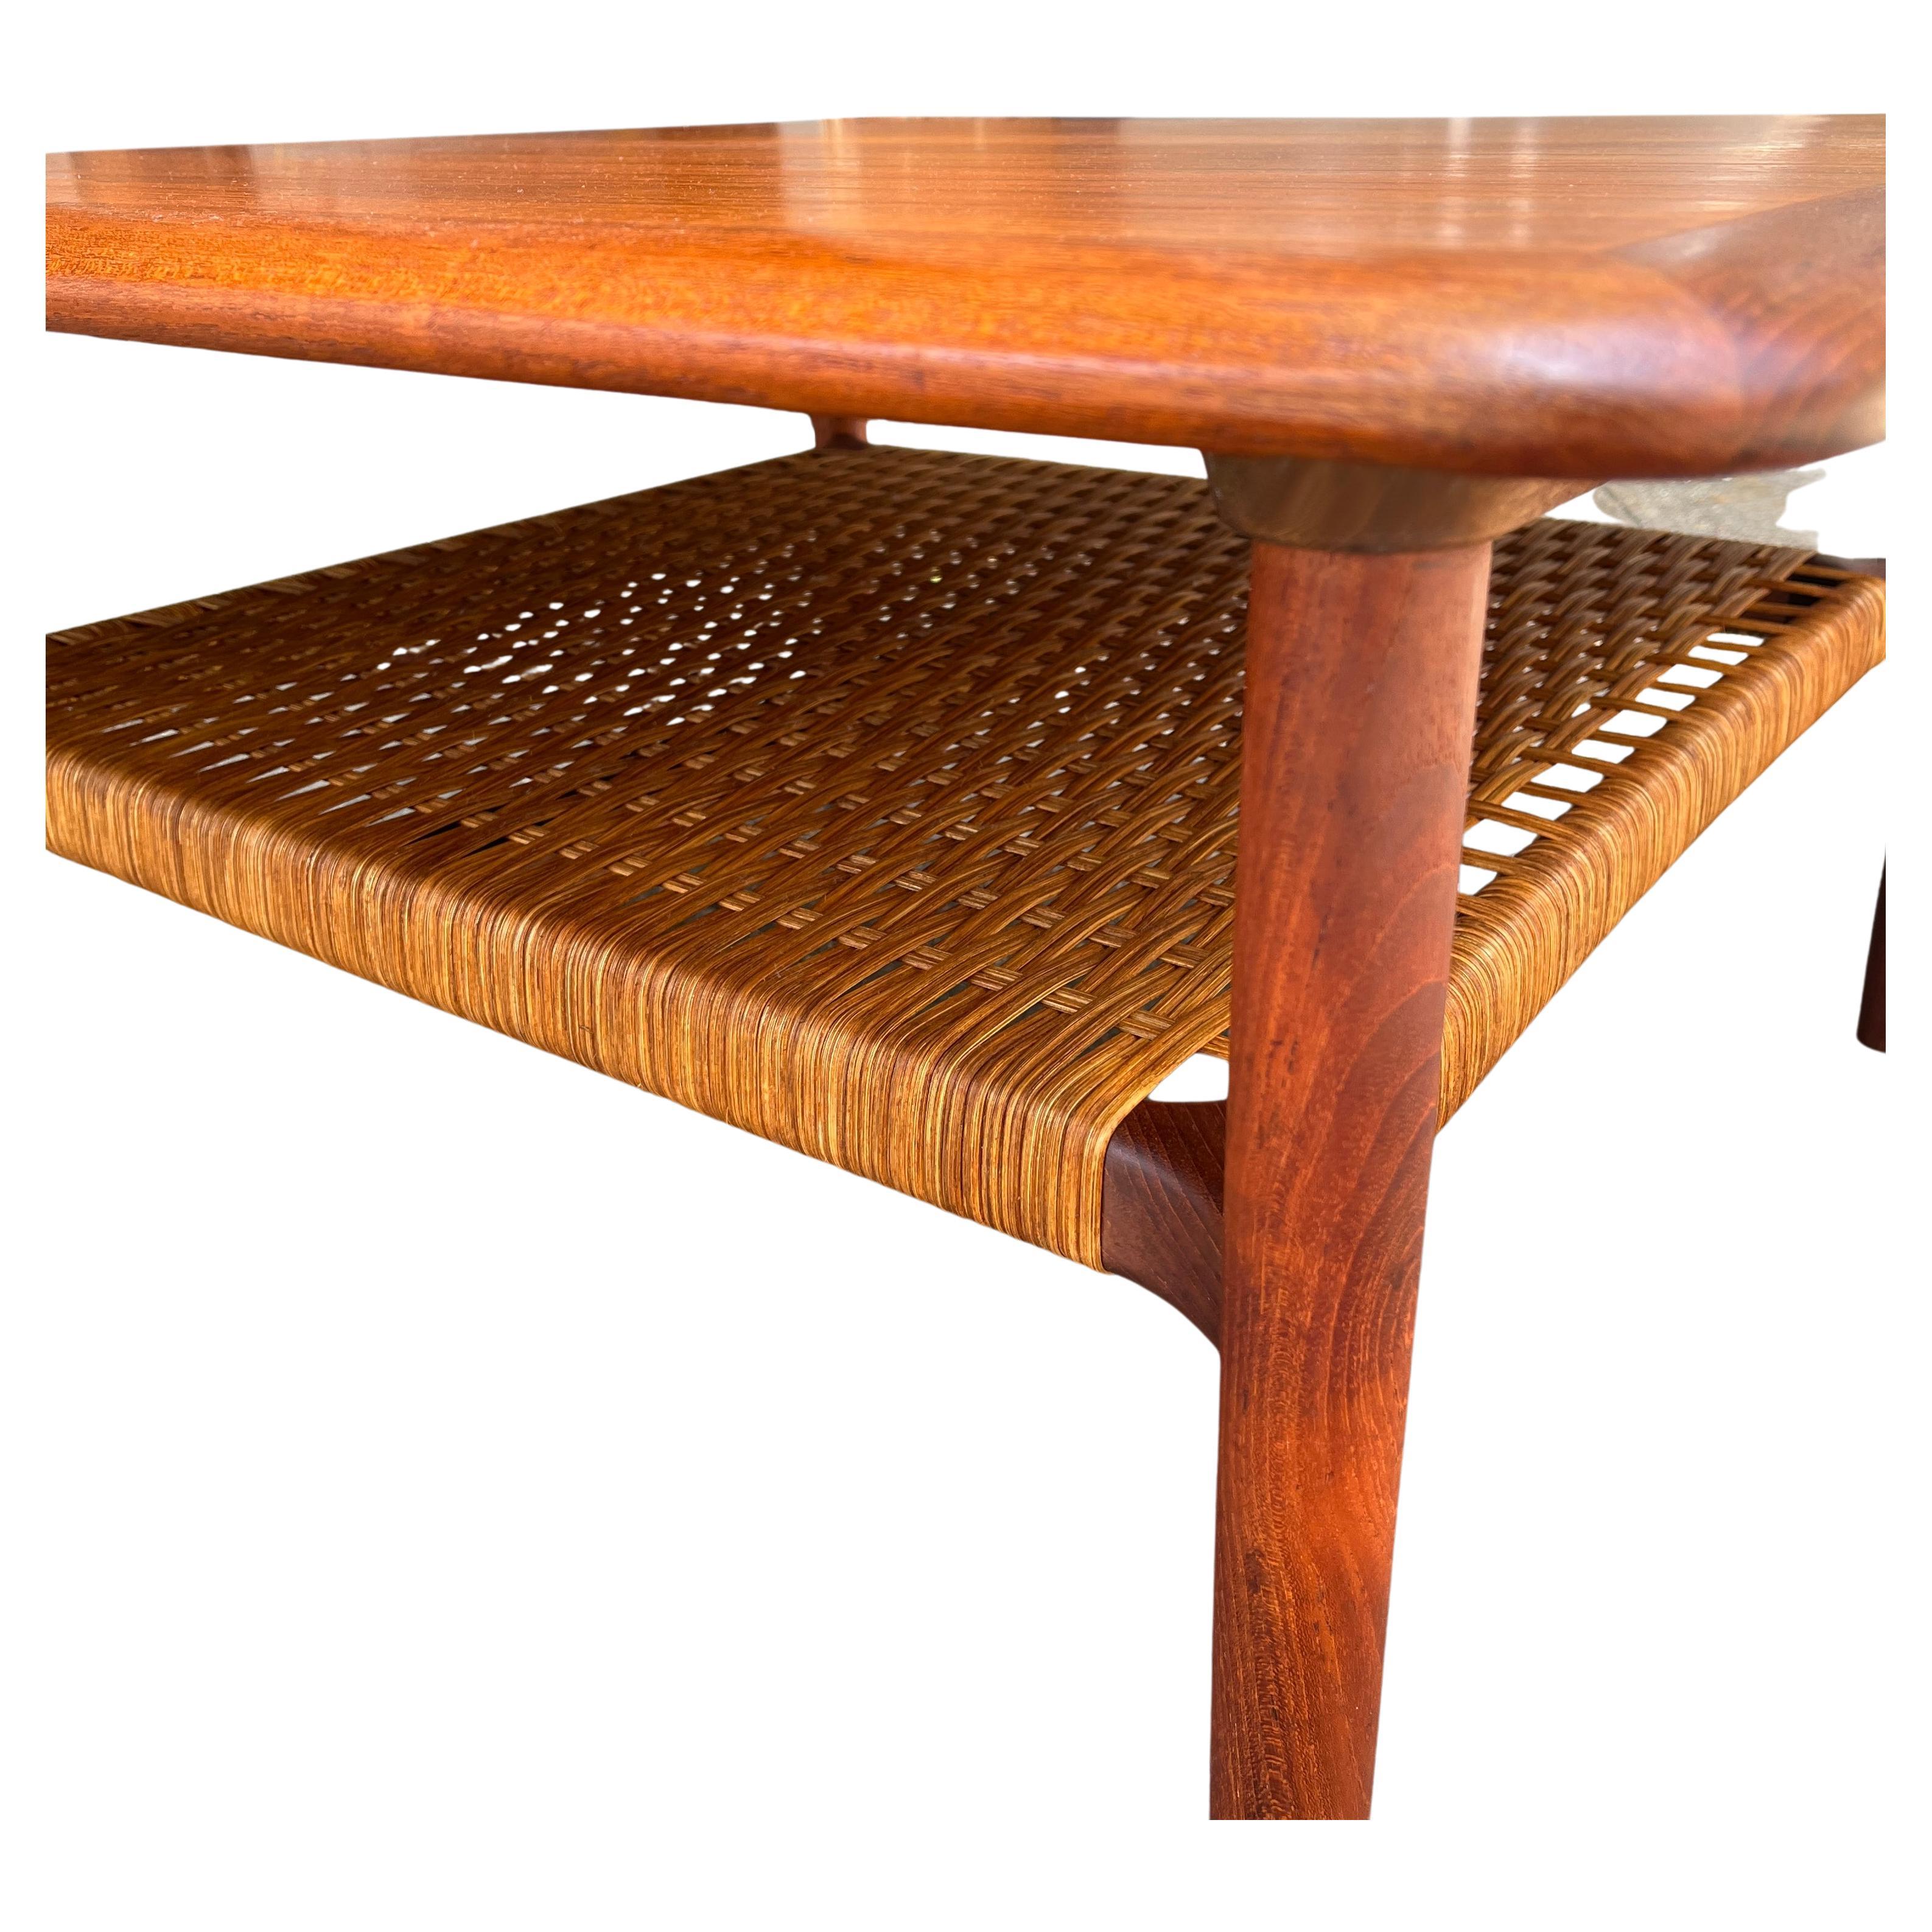 Beautiful Midcentury Teak and Cane Coffee Table For Sale 3